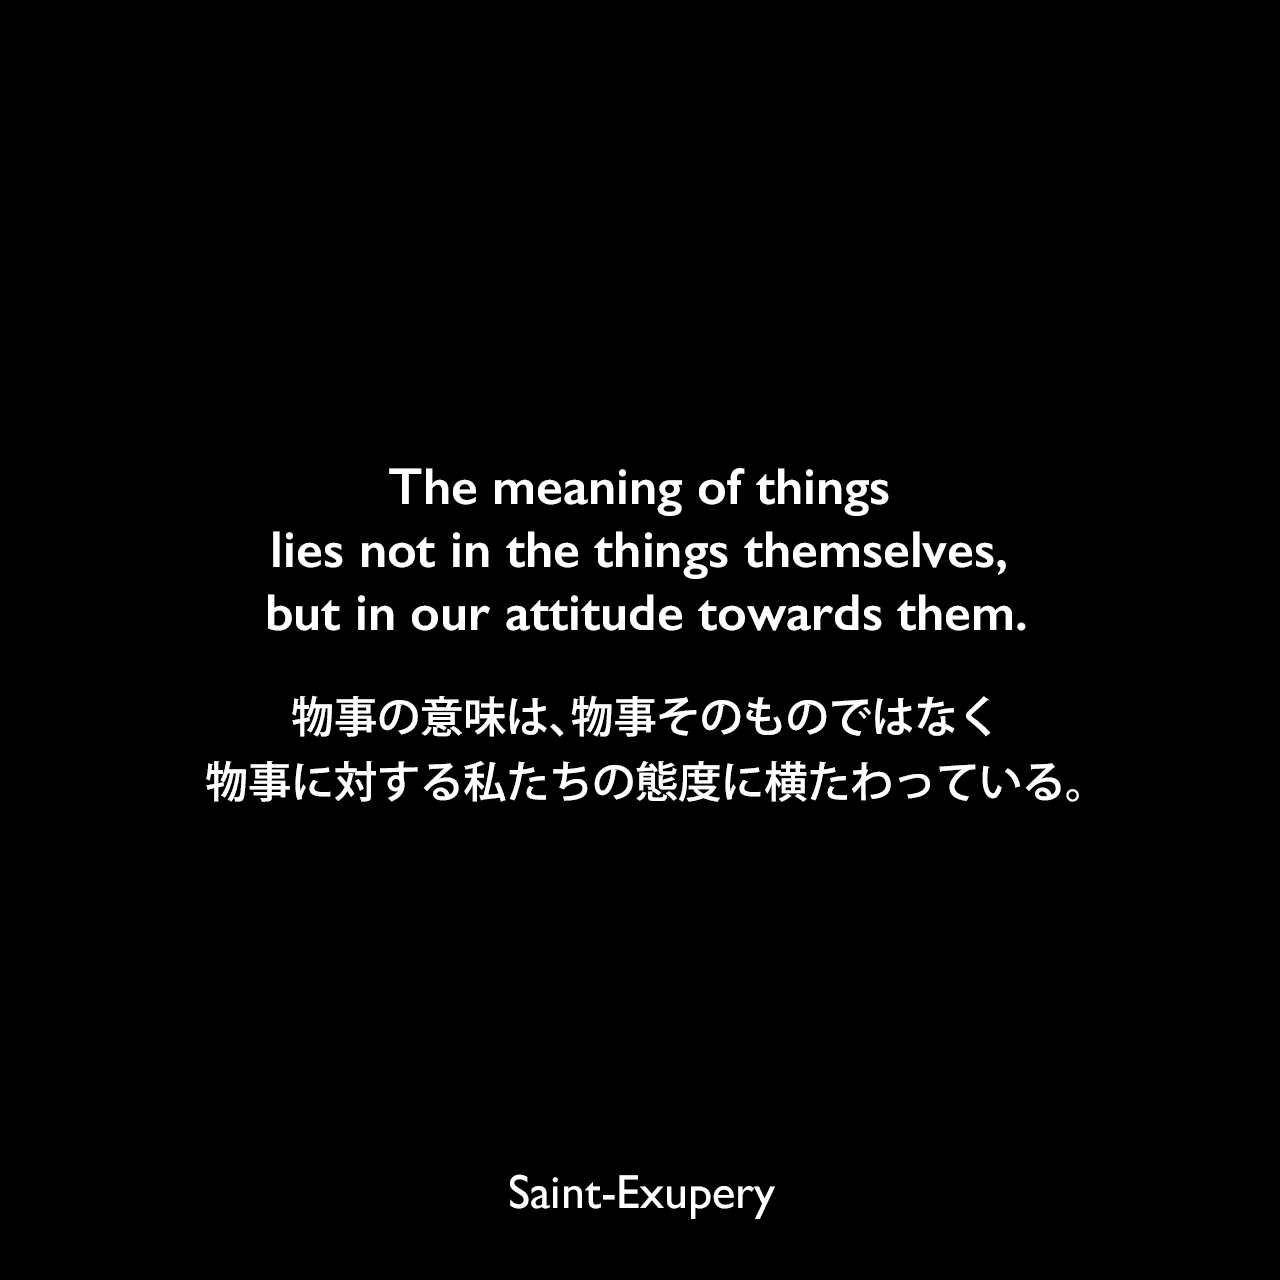 The meaning of things lies not in the things themselves, but in our attitude towards them.物事の意味は、物事そのものではなく、物事に対する私たちの態度に横たわっている。Saint-Exupery